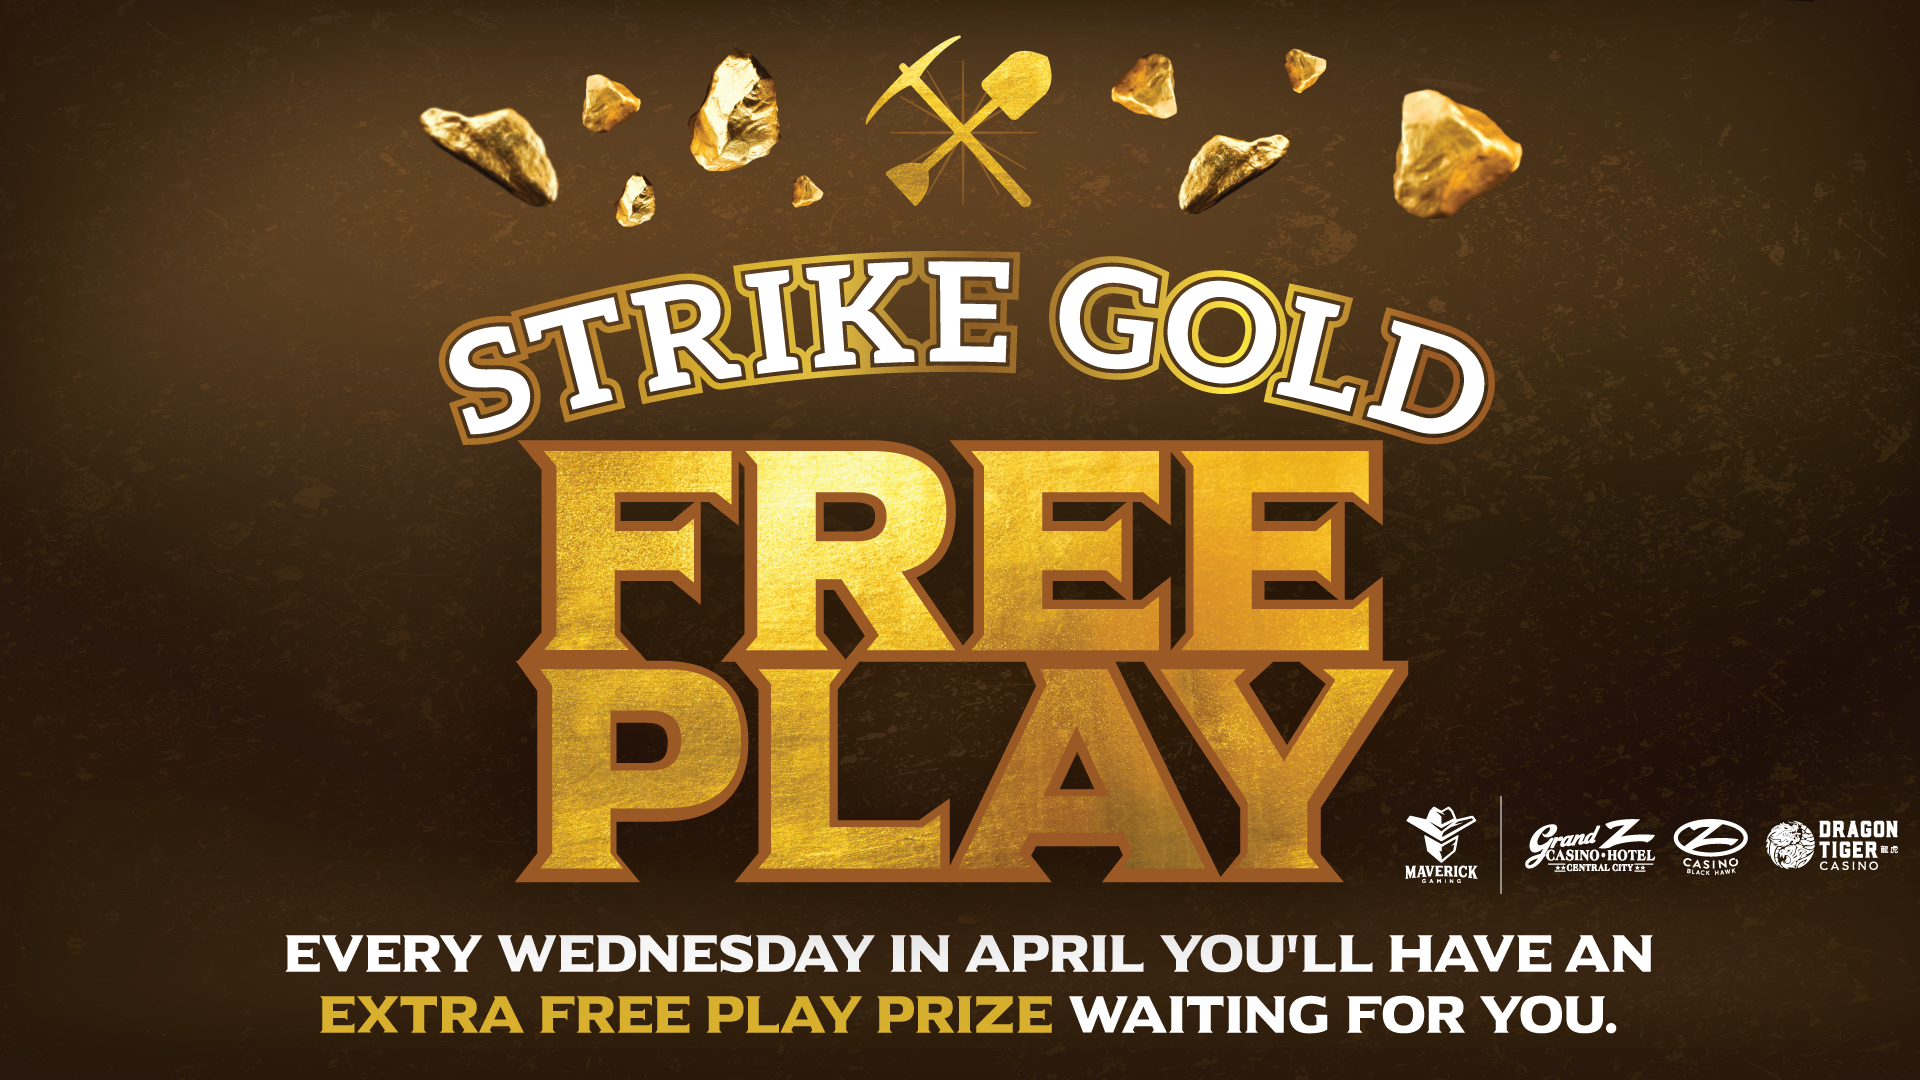 Strike Gold Free Play Every Wednesday in April You'll Have An Extra Free Play Prize Waiting For You.